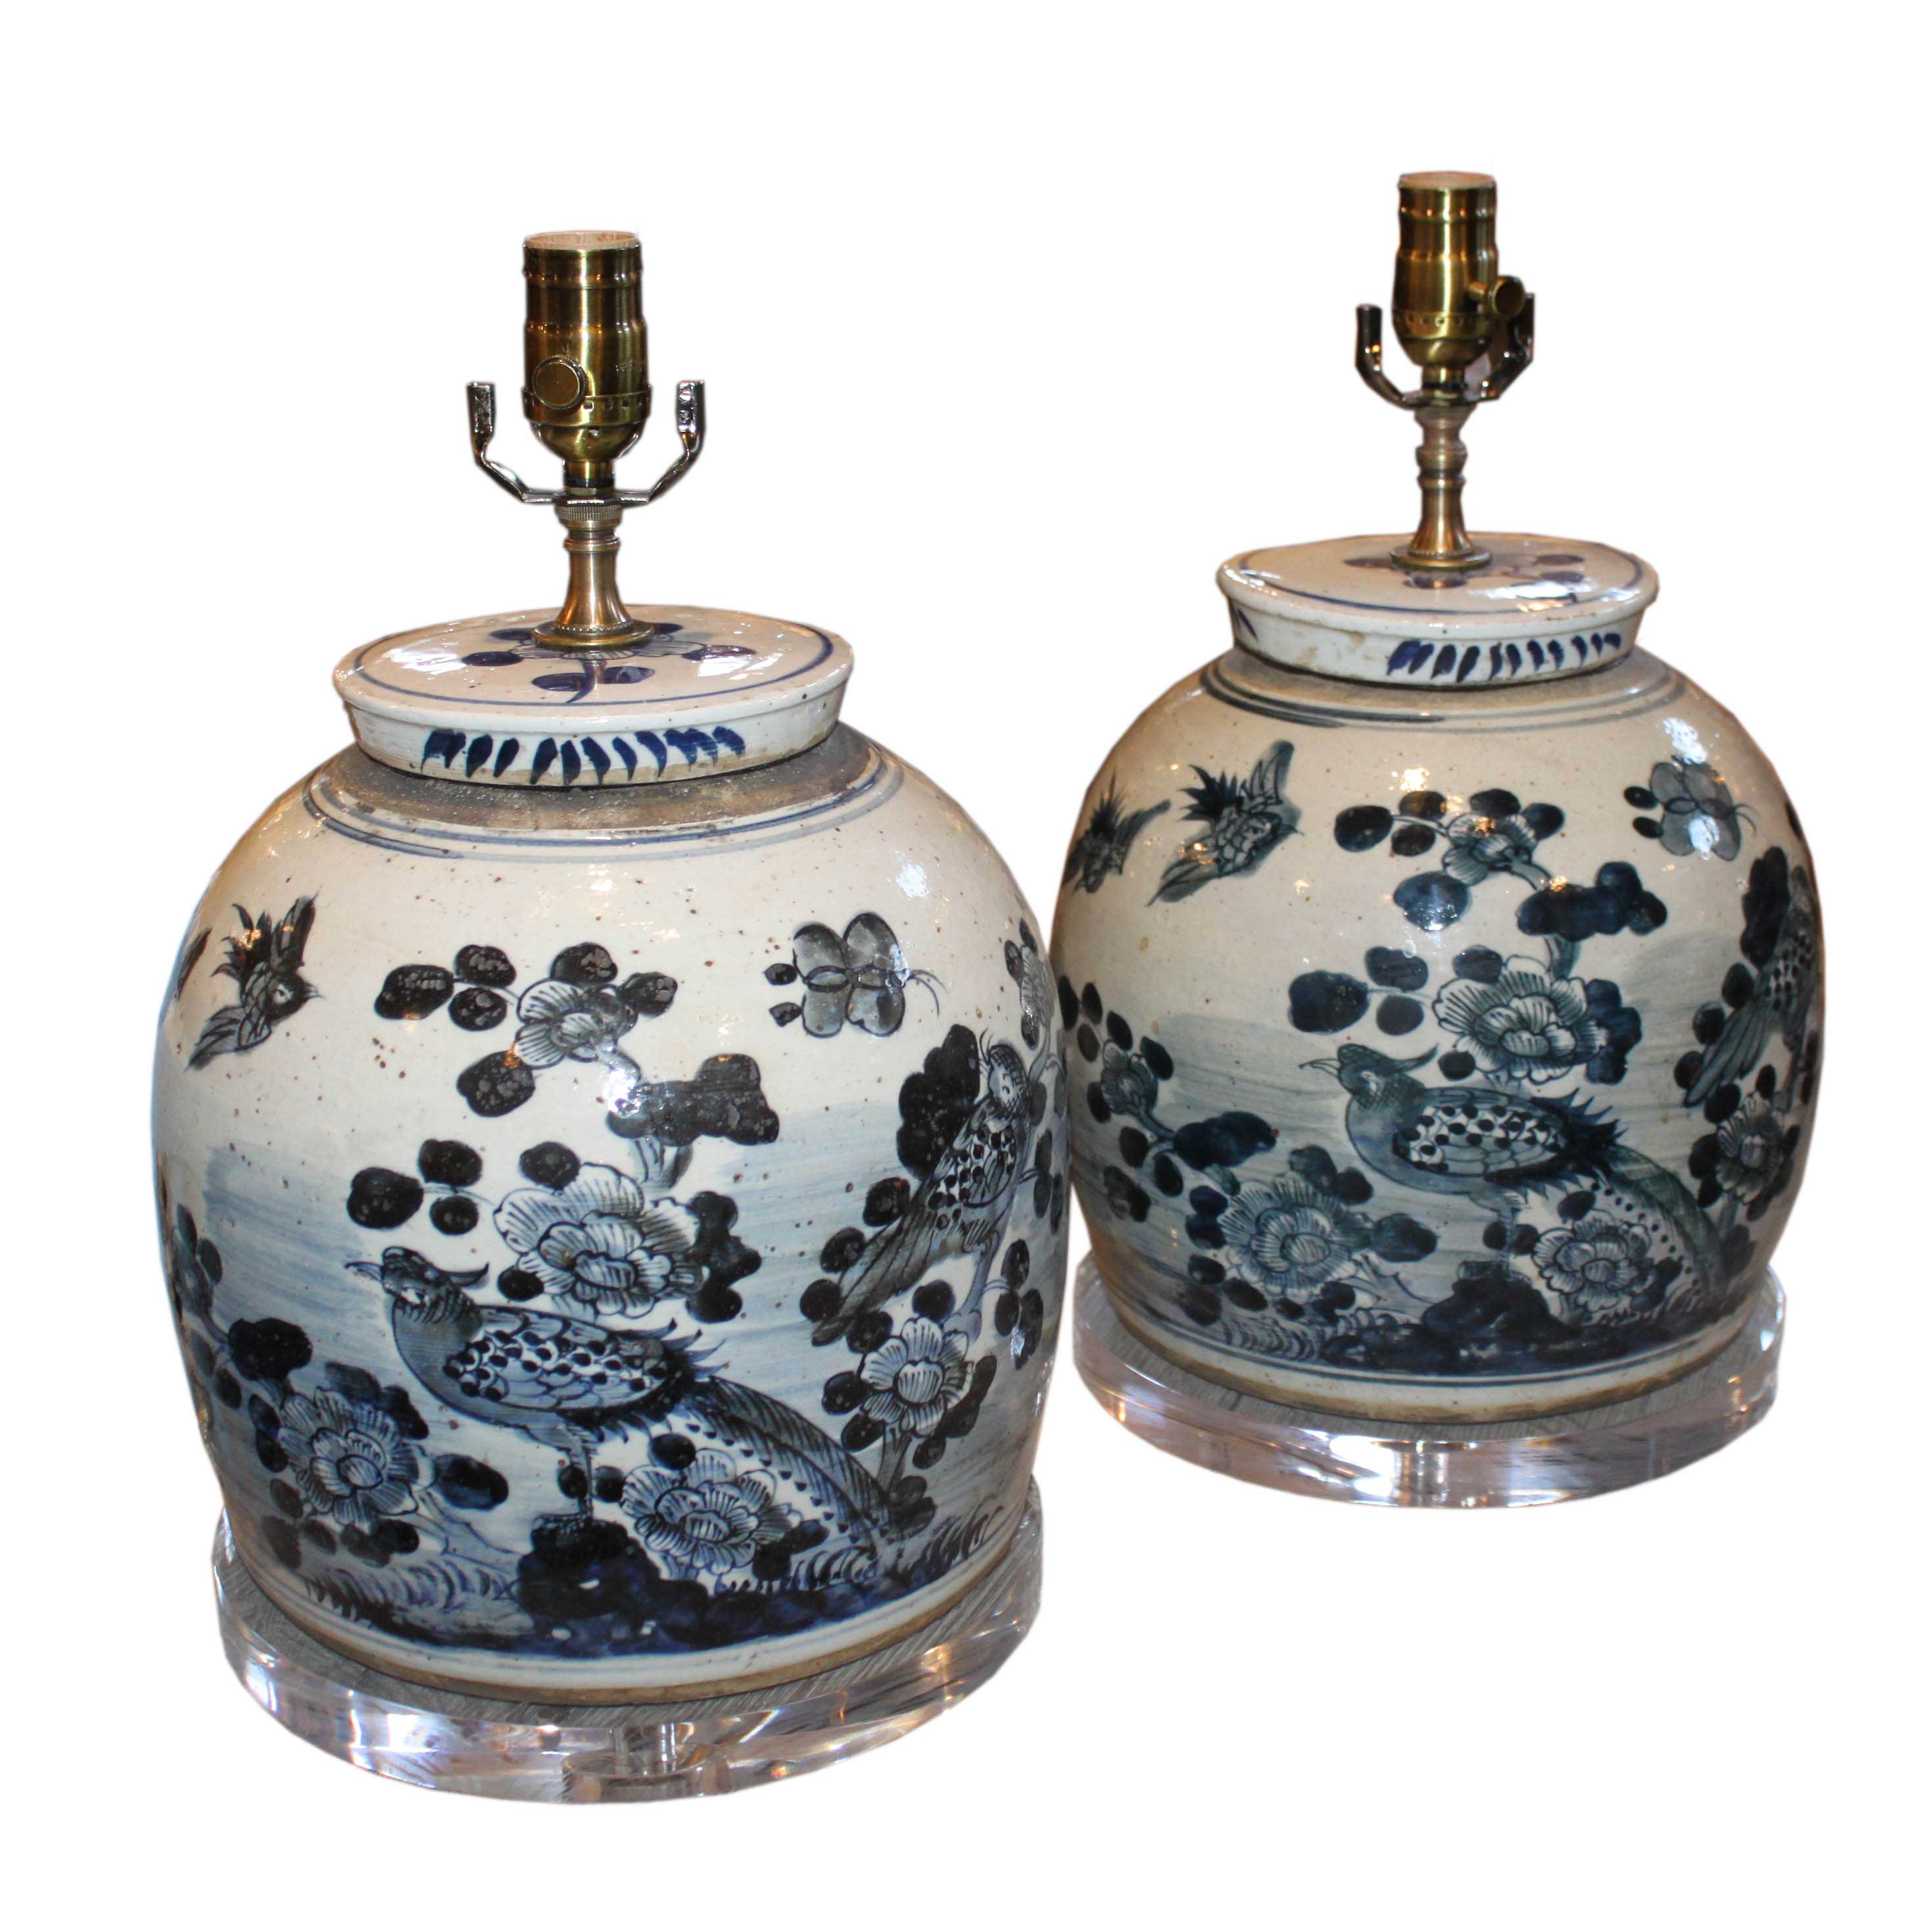 Blue White Porcelain Jar Lamps With Lids On Lucite Bases Foxglove Antiques Galleries,How To Update Old Kitchen Cabinets Without Replacing Them